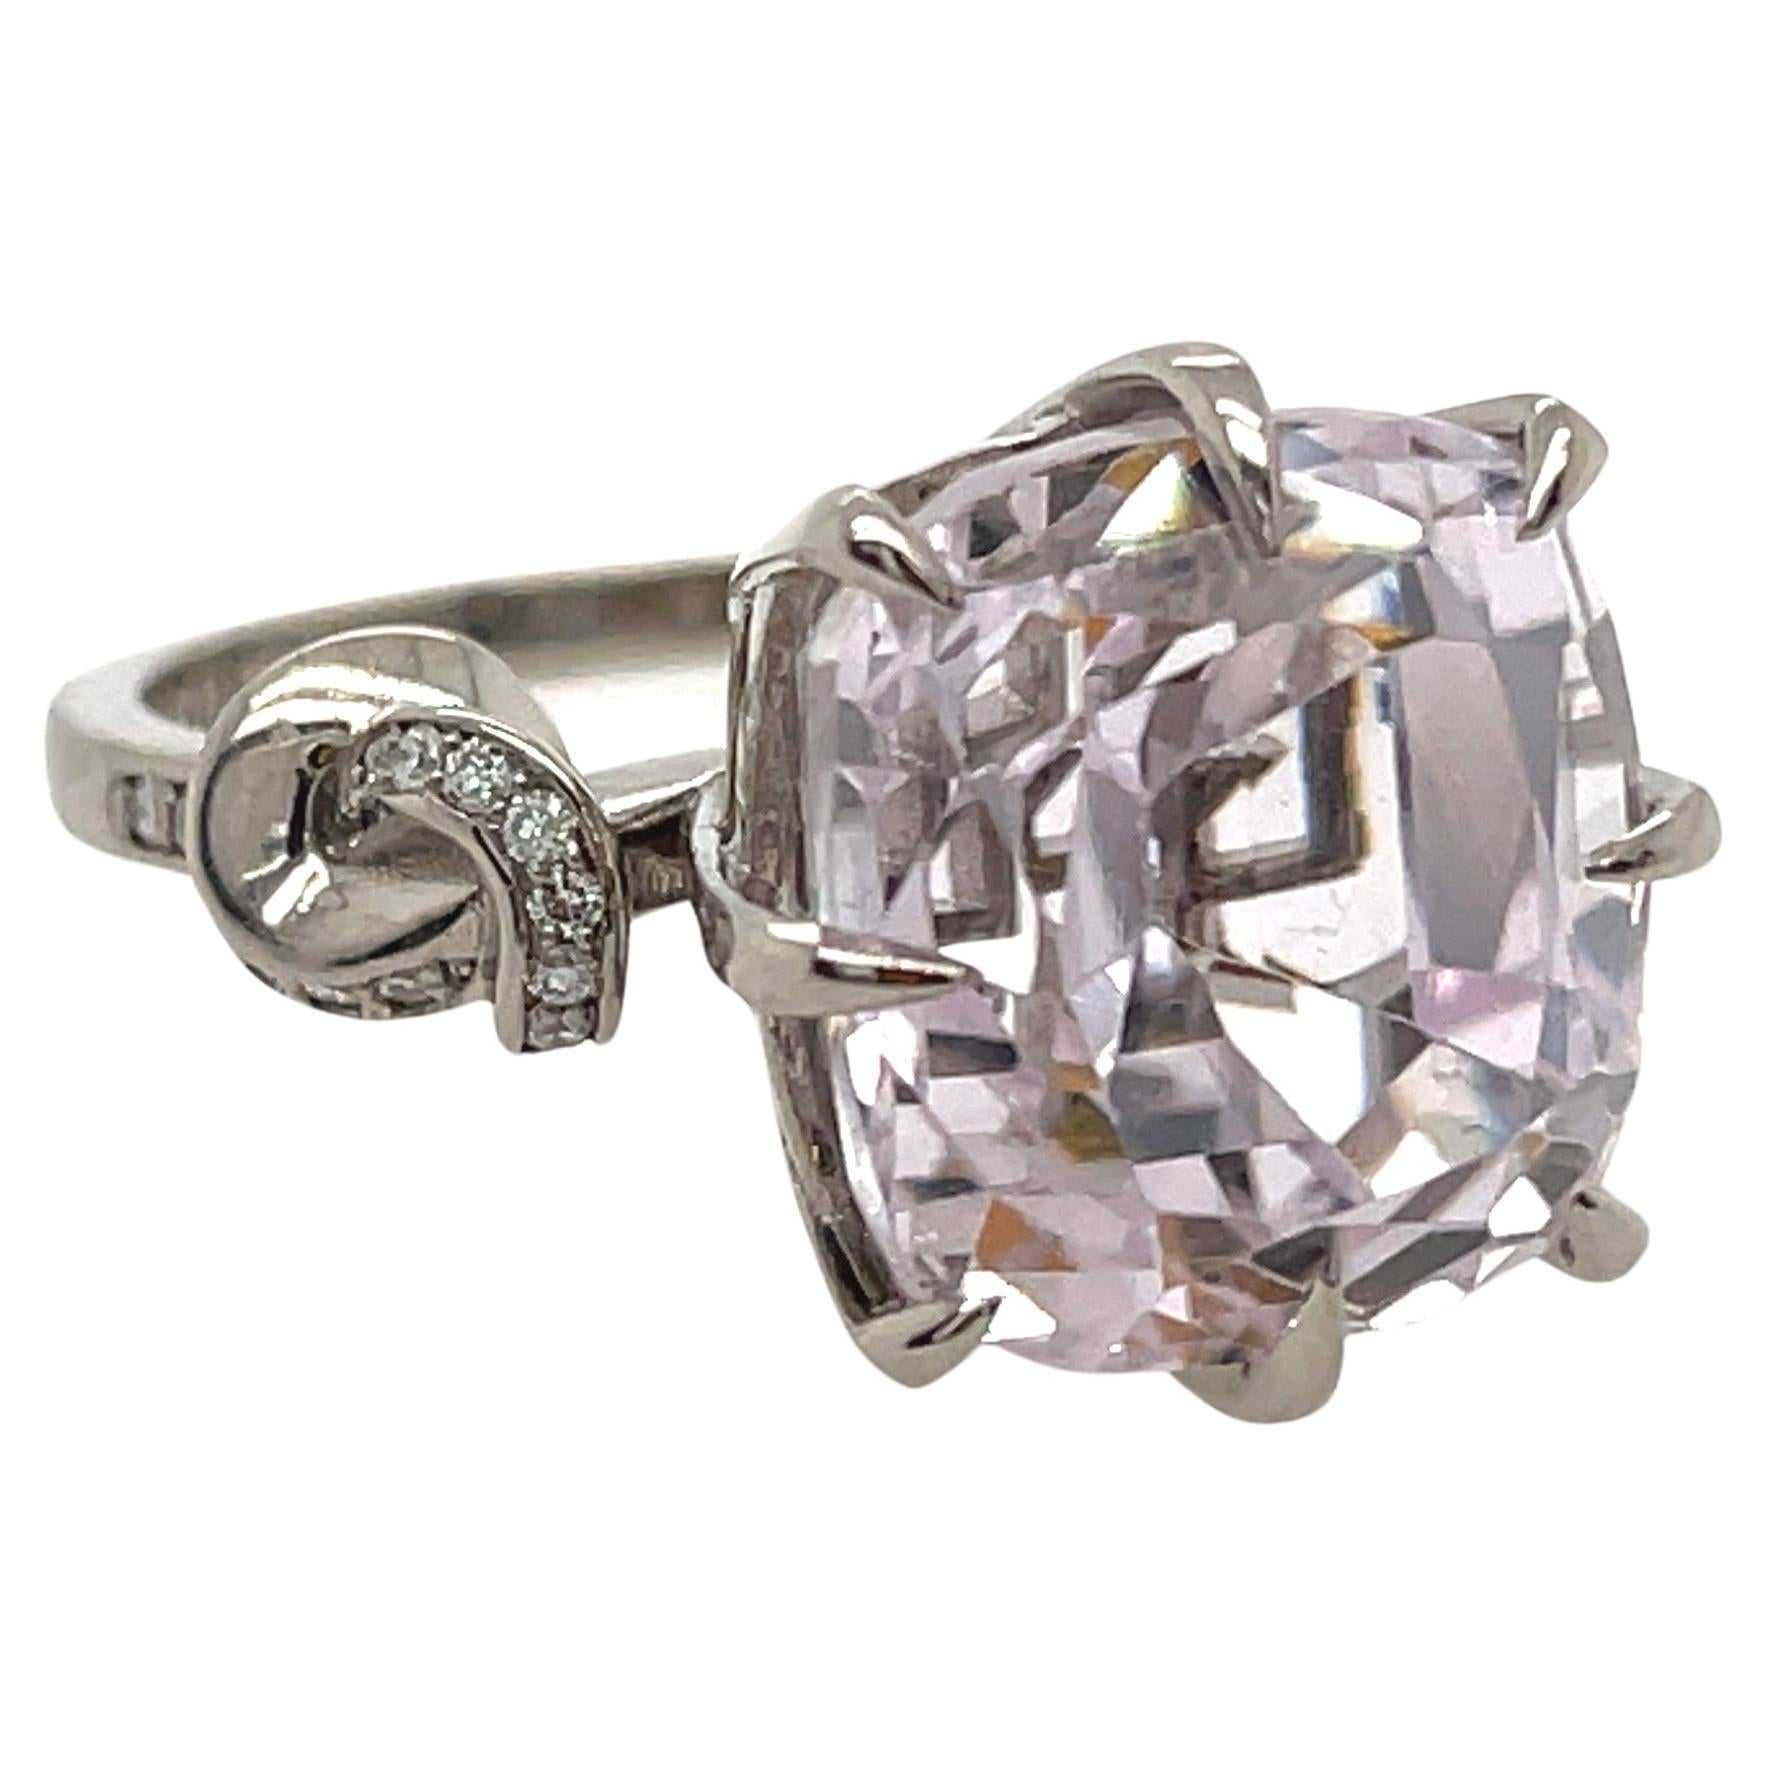 6ct Kunzite Forget Me Knot ring with diamonds in 18ct white gold 